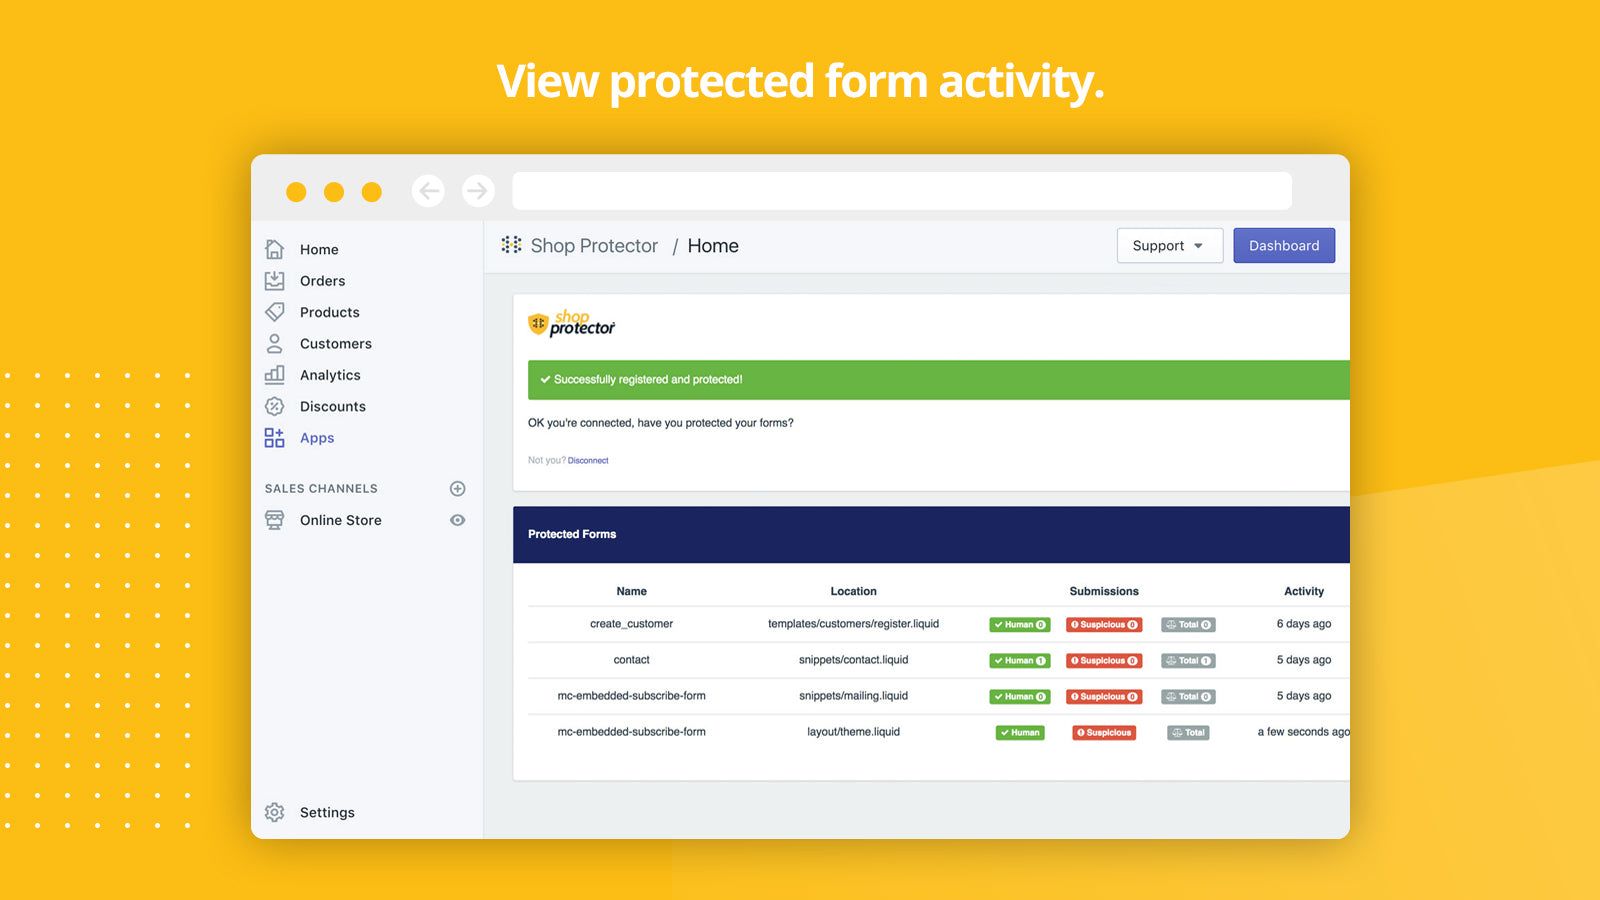 View all your protected form activity from bots.